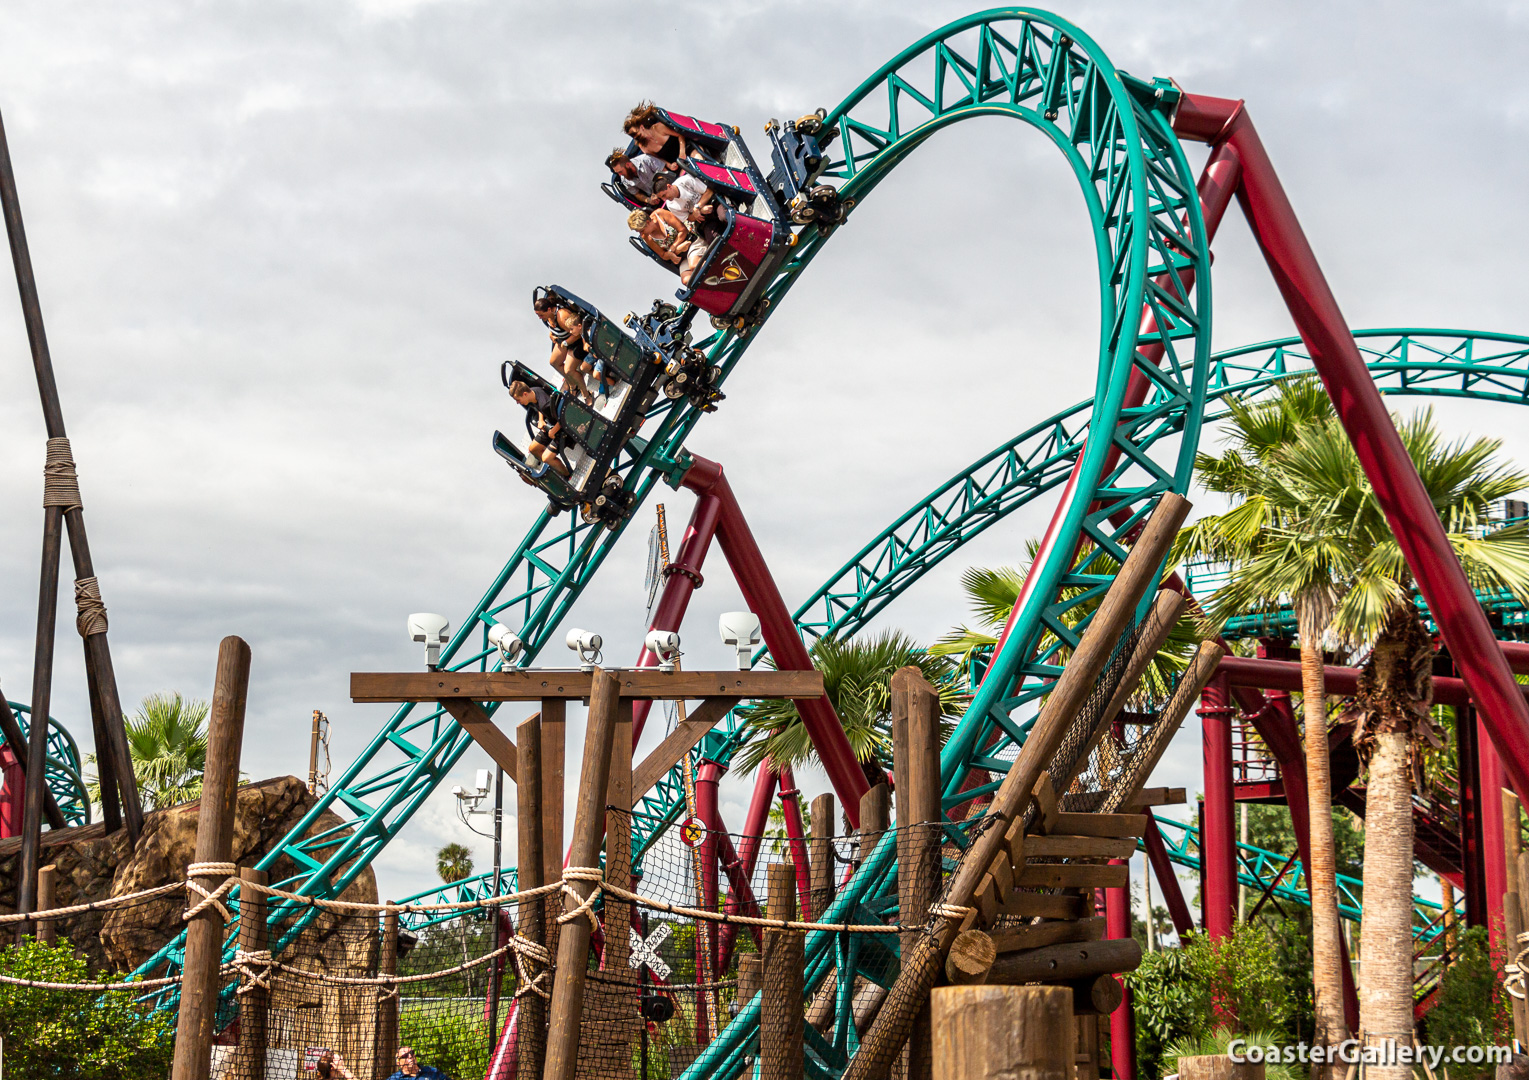 Spinning Roller Coaster - pictures of the Cobra's Curse thrill ride at Busch Gardens Tampa Bay